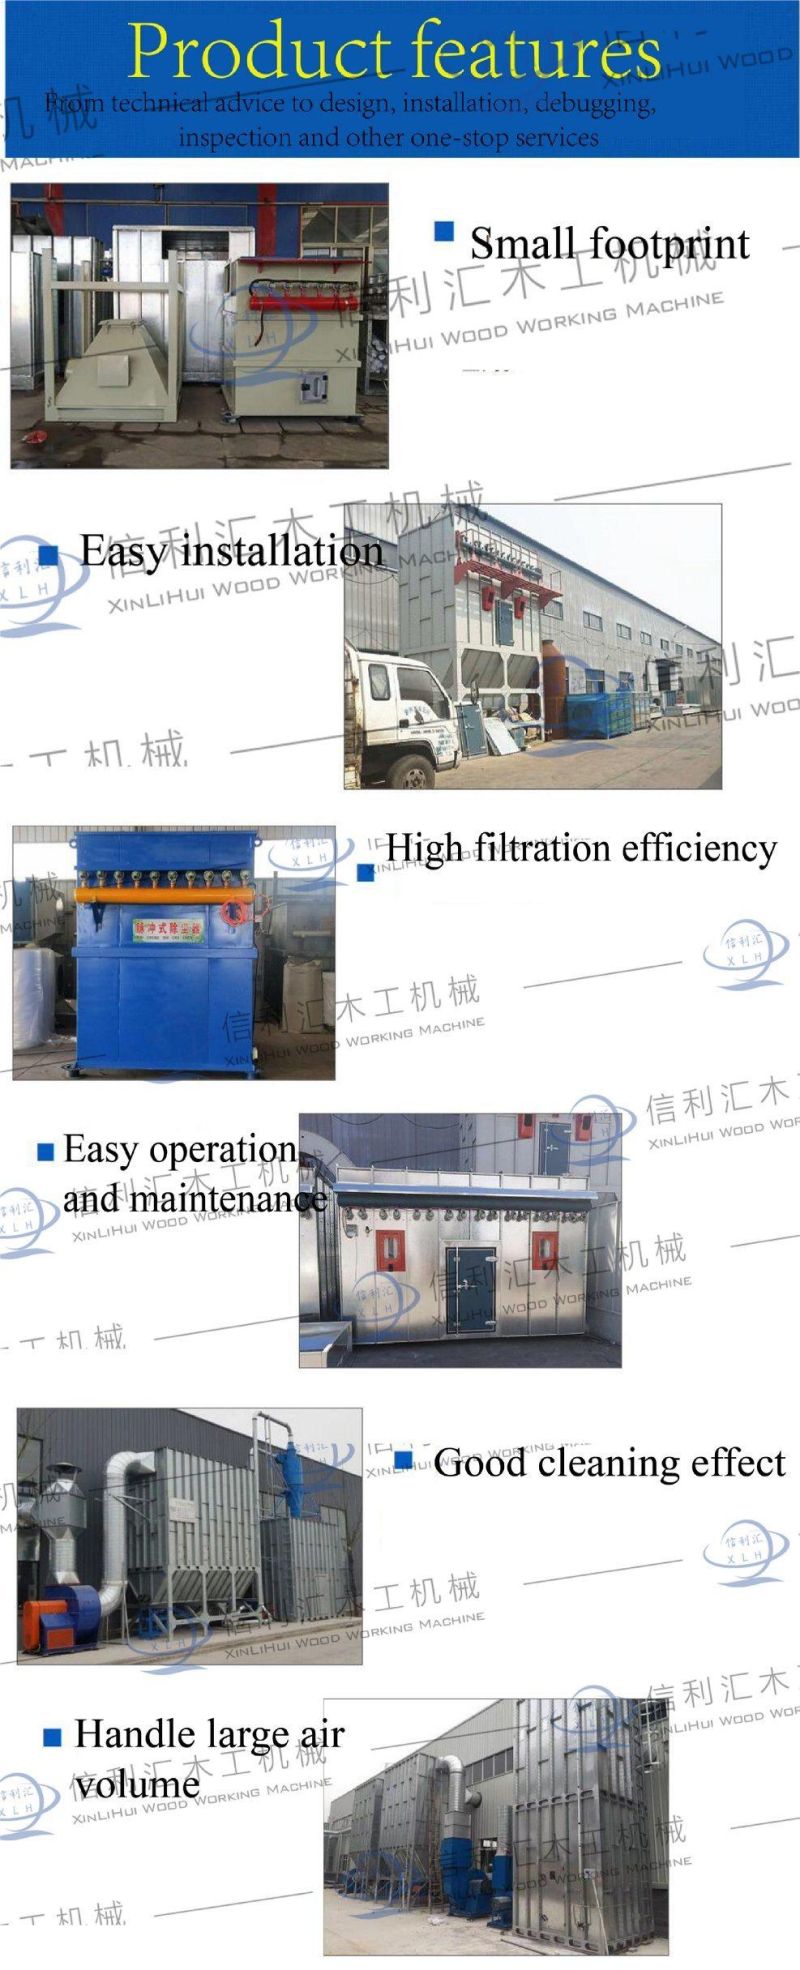 Cheap Cost High Efficiency Cyclone Carbon Steel Cyclone Dust Collector Small Diameter Cyclone Dust Collector Machine Plant Dust Cleaner Cyclone